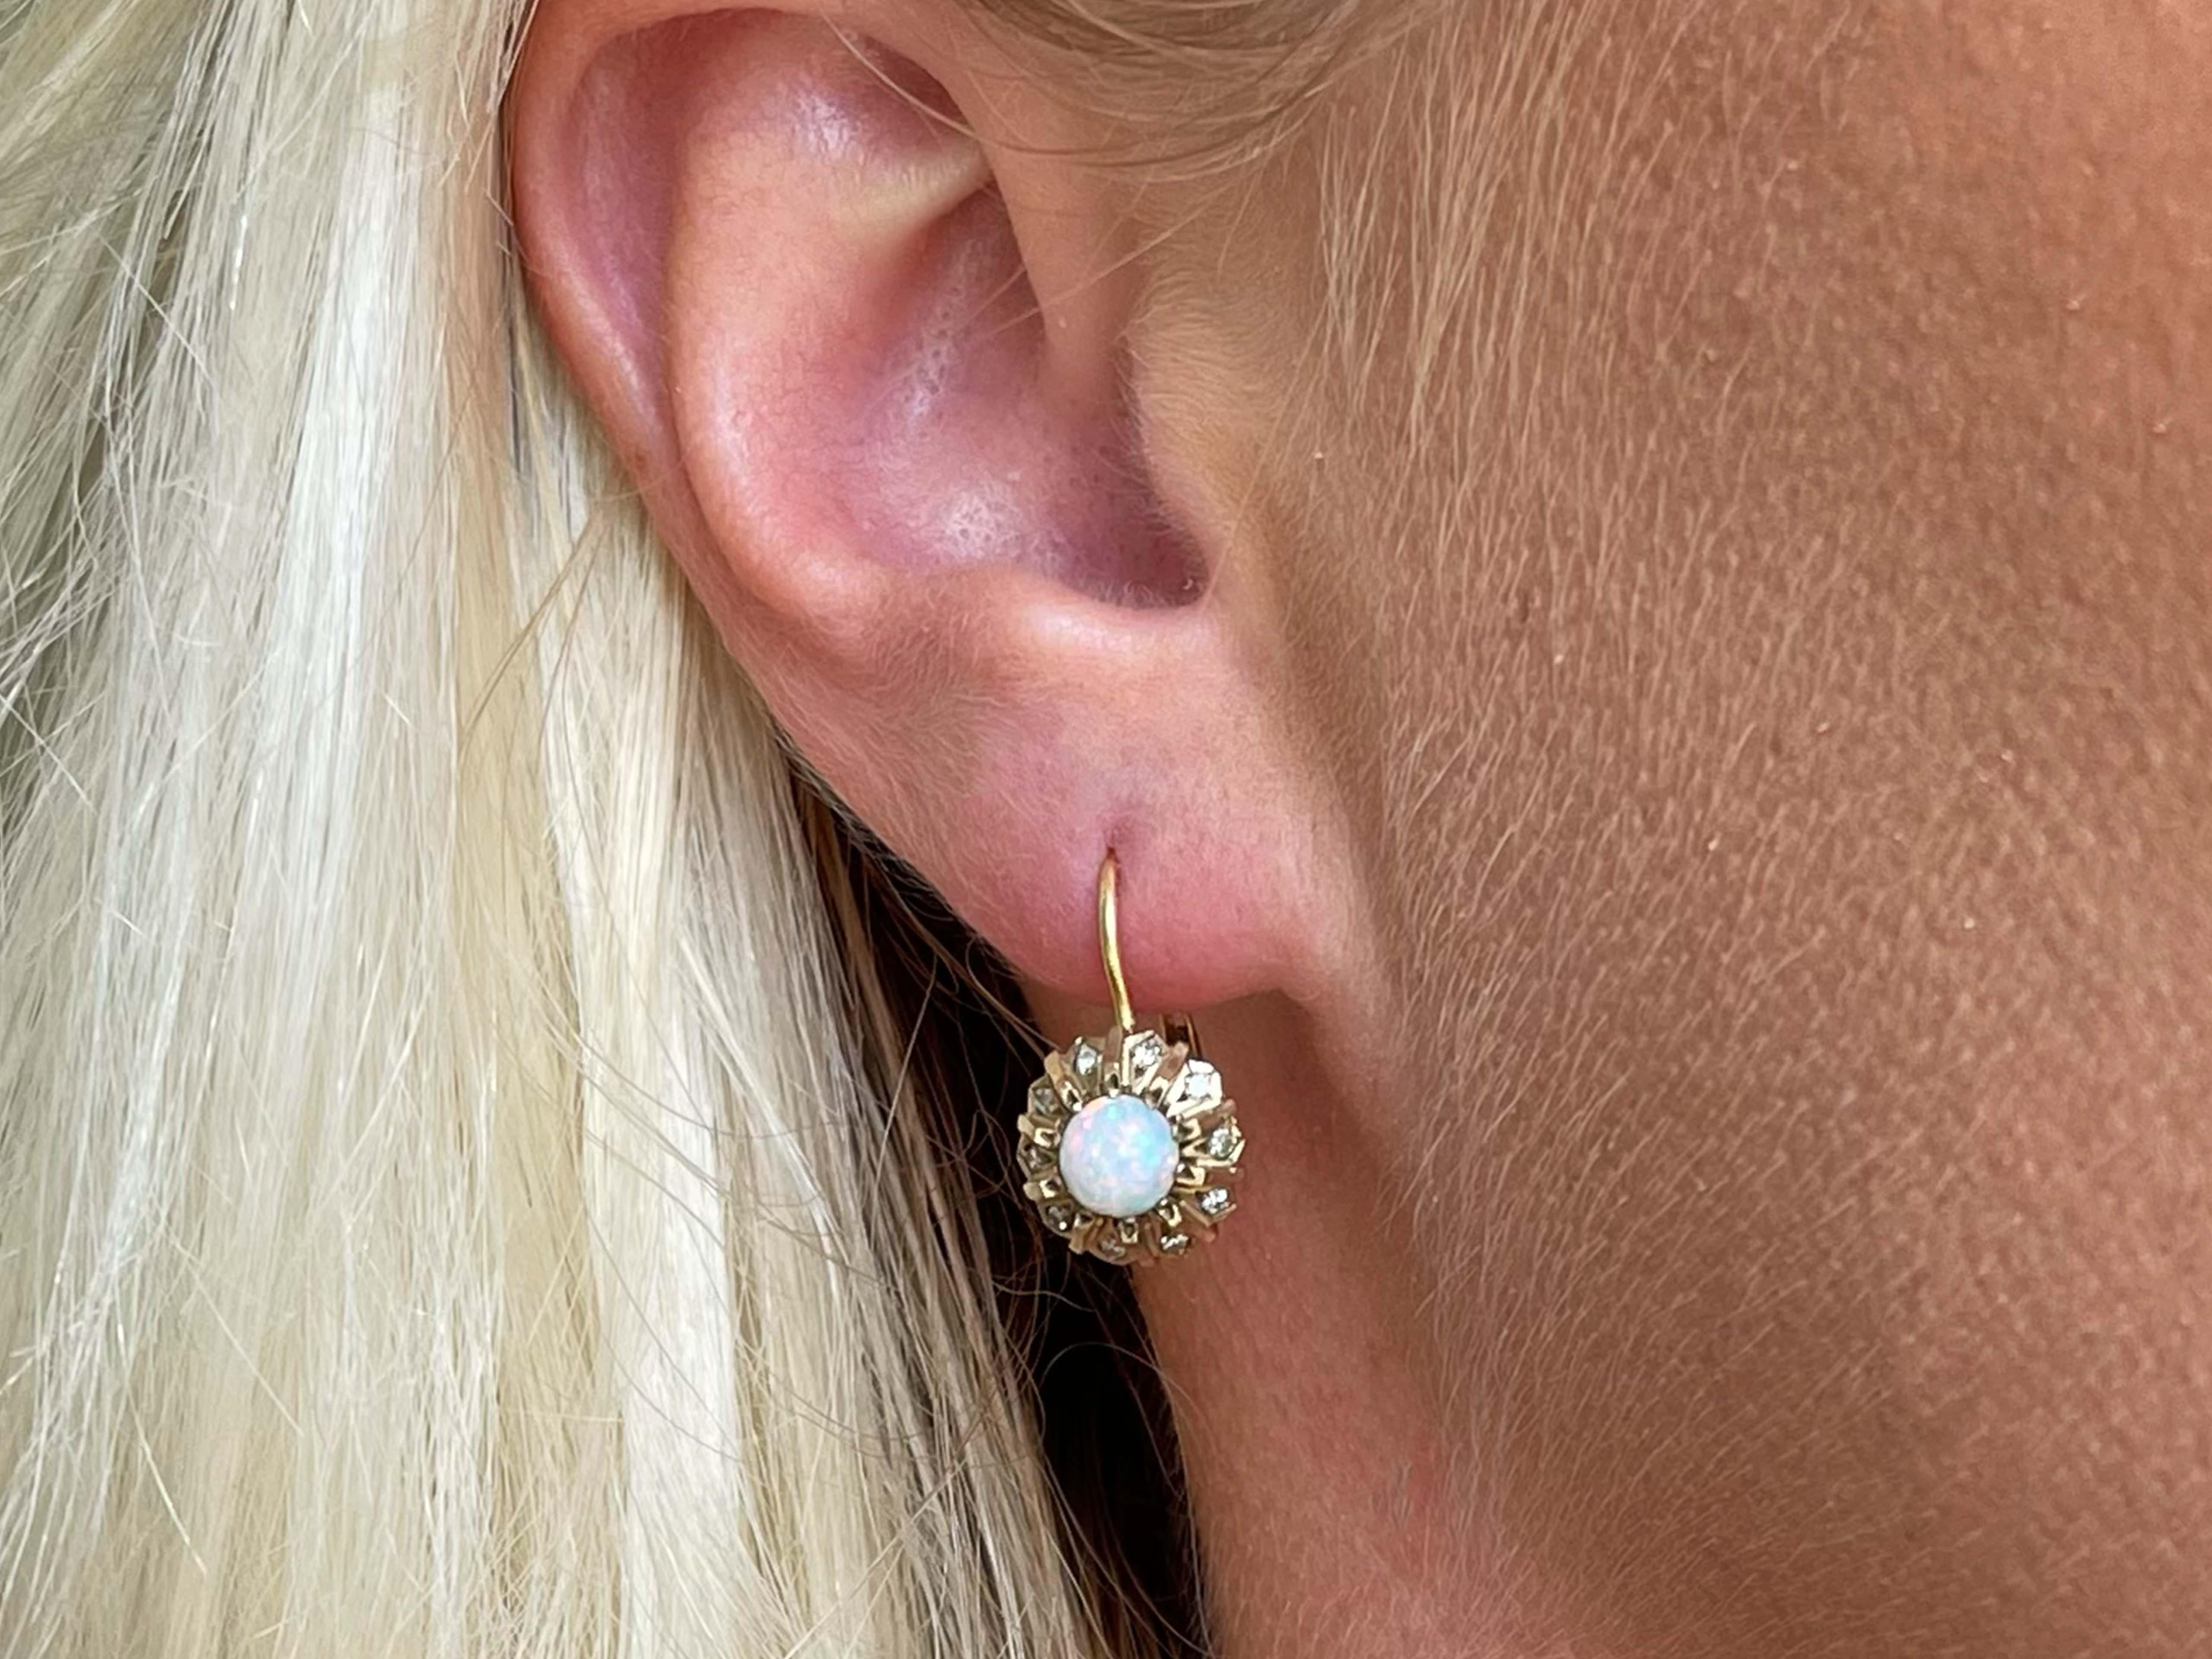 Earrings Specifications:

Metal: 14K Yellow Gold

Total Weight: 4.1 Grams

Opal Diameter: 5 mm
​
​Diamond Color: H-I
​
​Diamond Count: 20 Single cut diamonds
​
​Diamond Clarity: SI1-SI2
​
​Diamond Carat Weight: ~0.10 carats
Condition: Preowned, Very